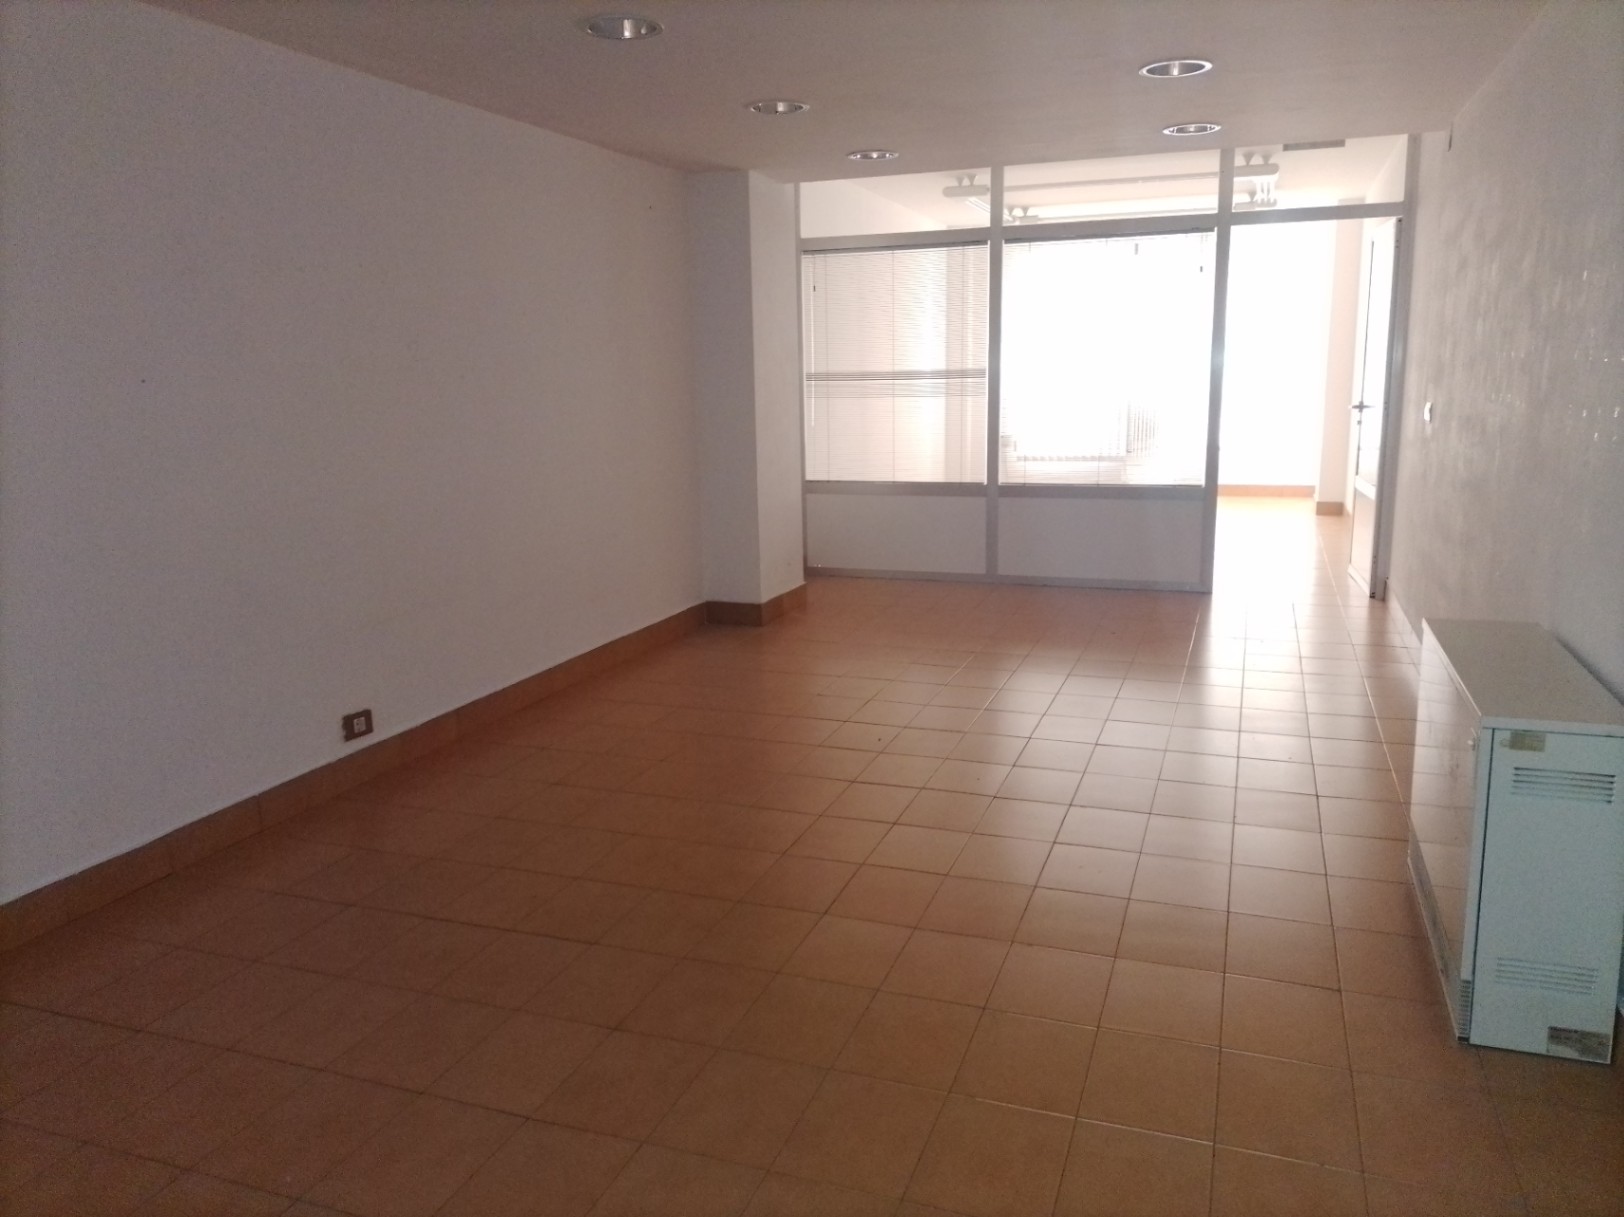 Office for sale in the city center